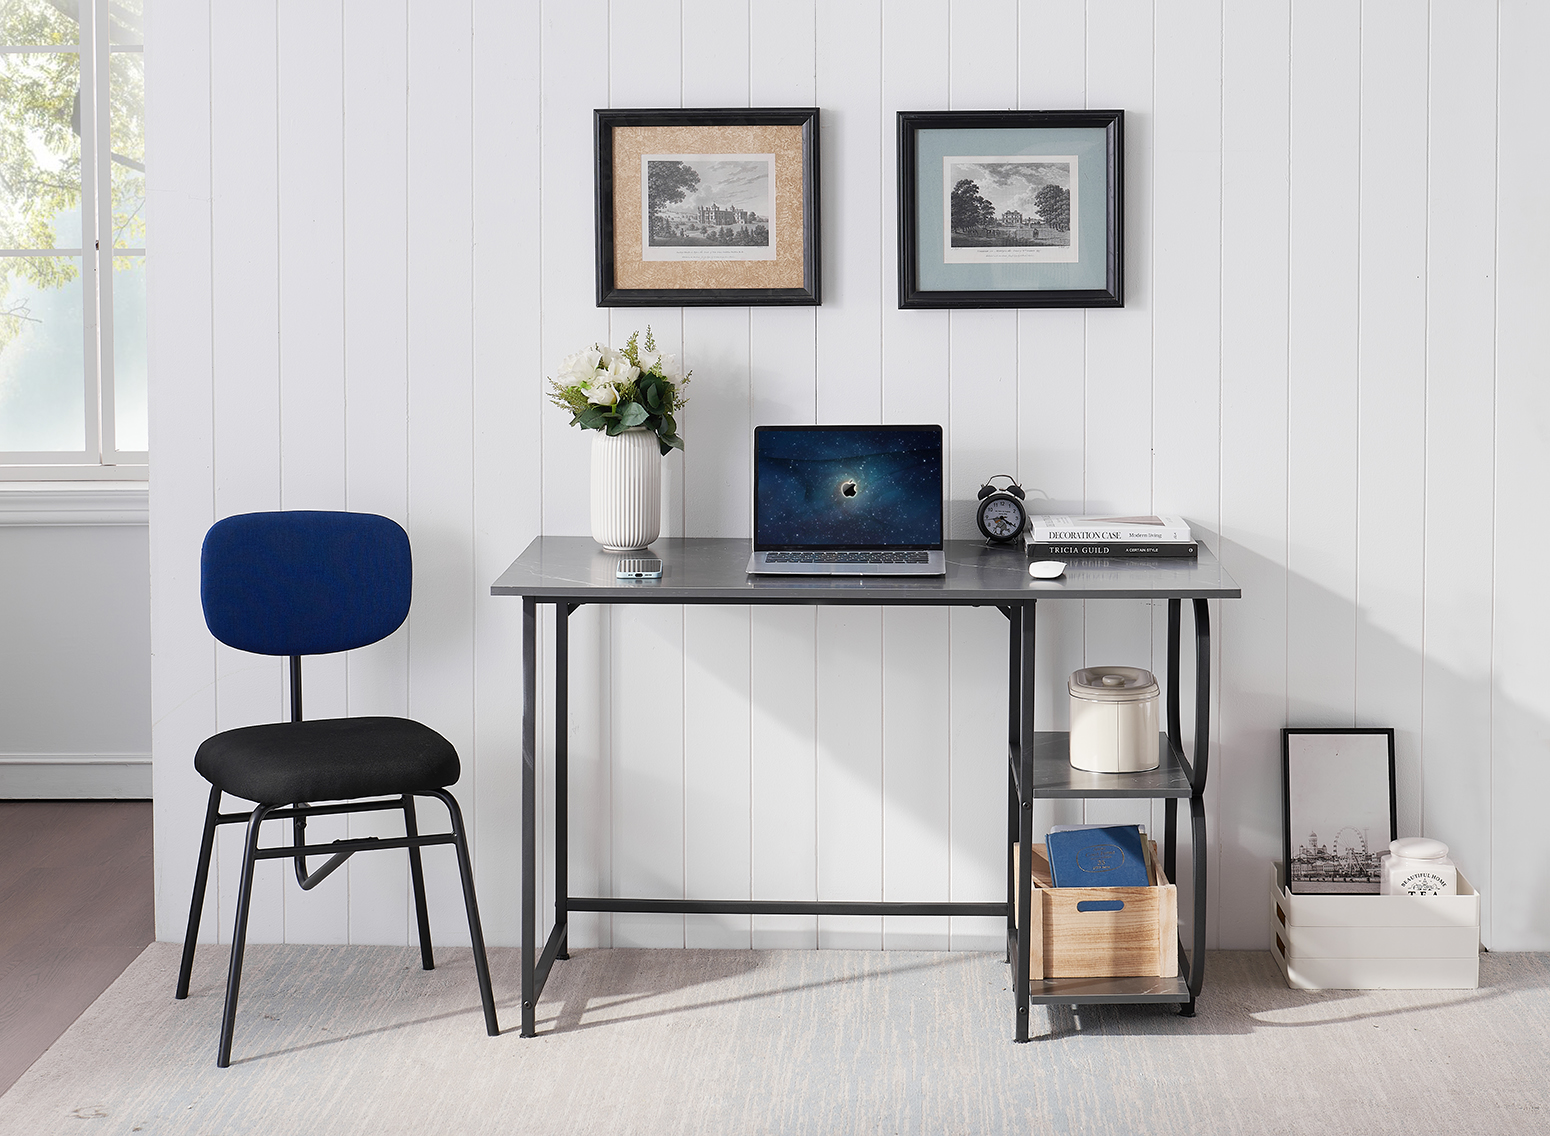 Bestier Computer Home Office Desk With Metal Frame, Hutch